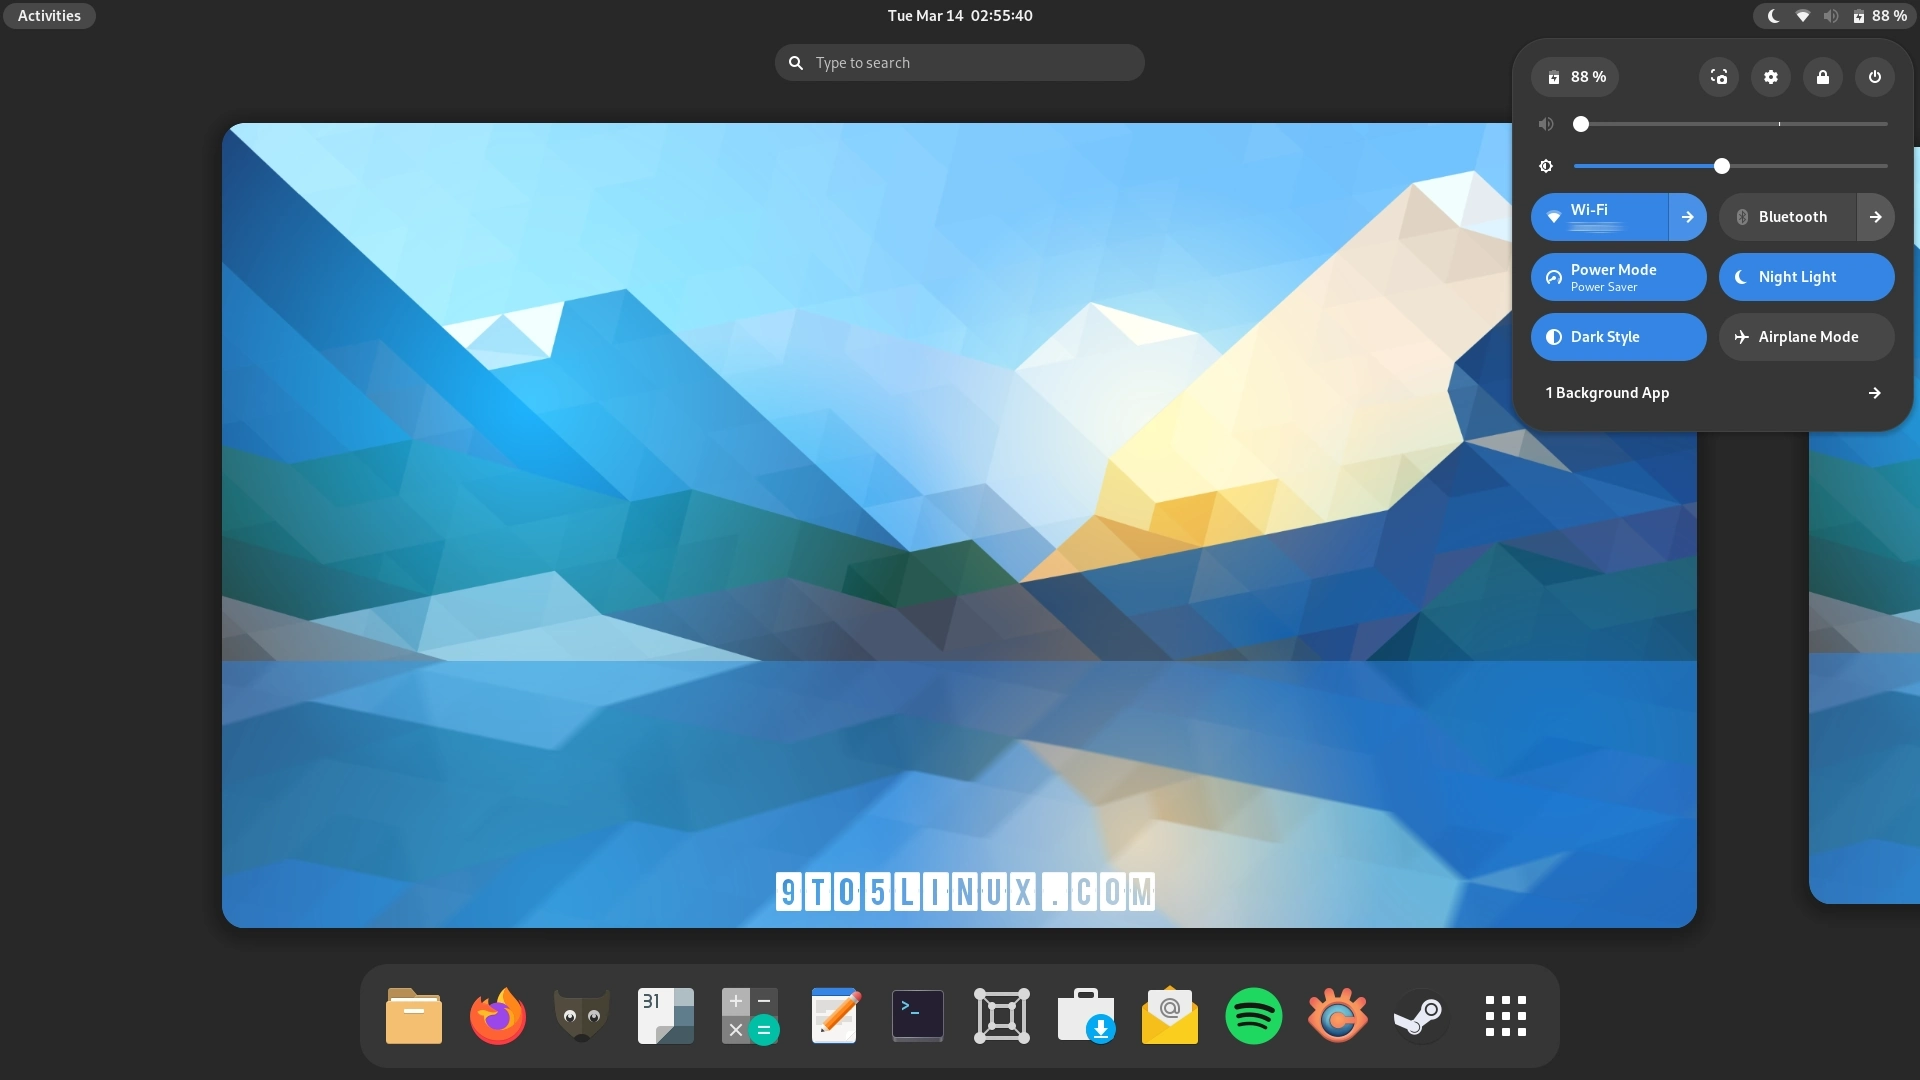 First Look at the GNOME 44 Desktop Environment on Fedora Linux 38